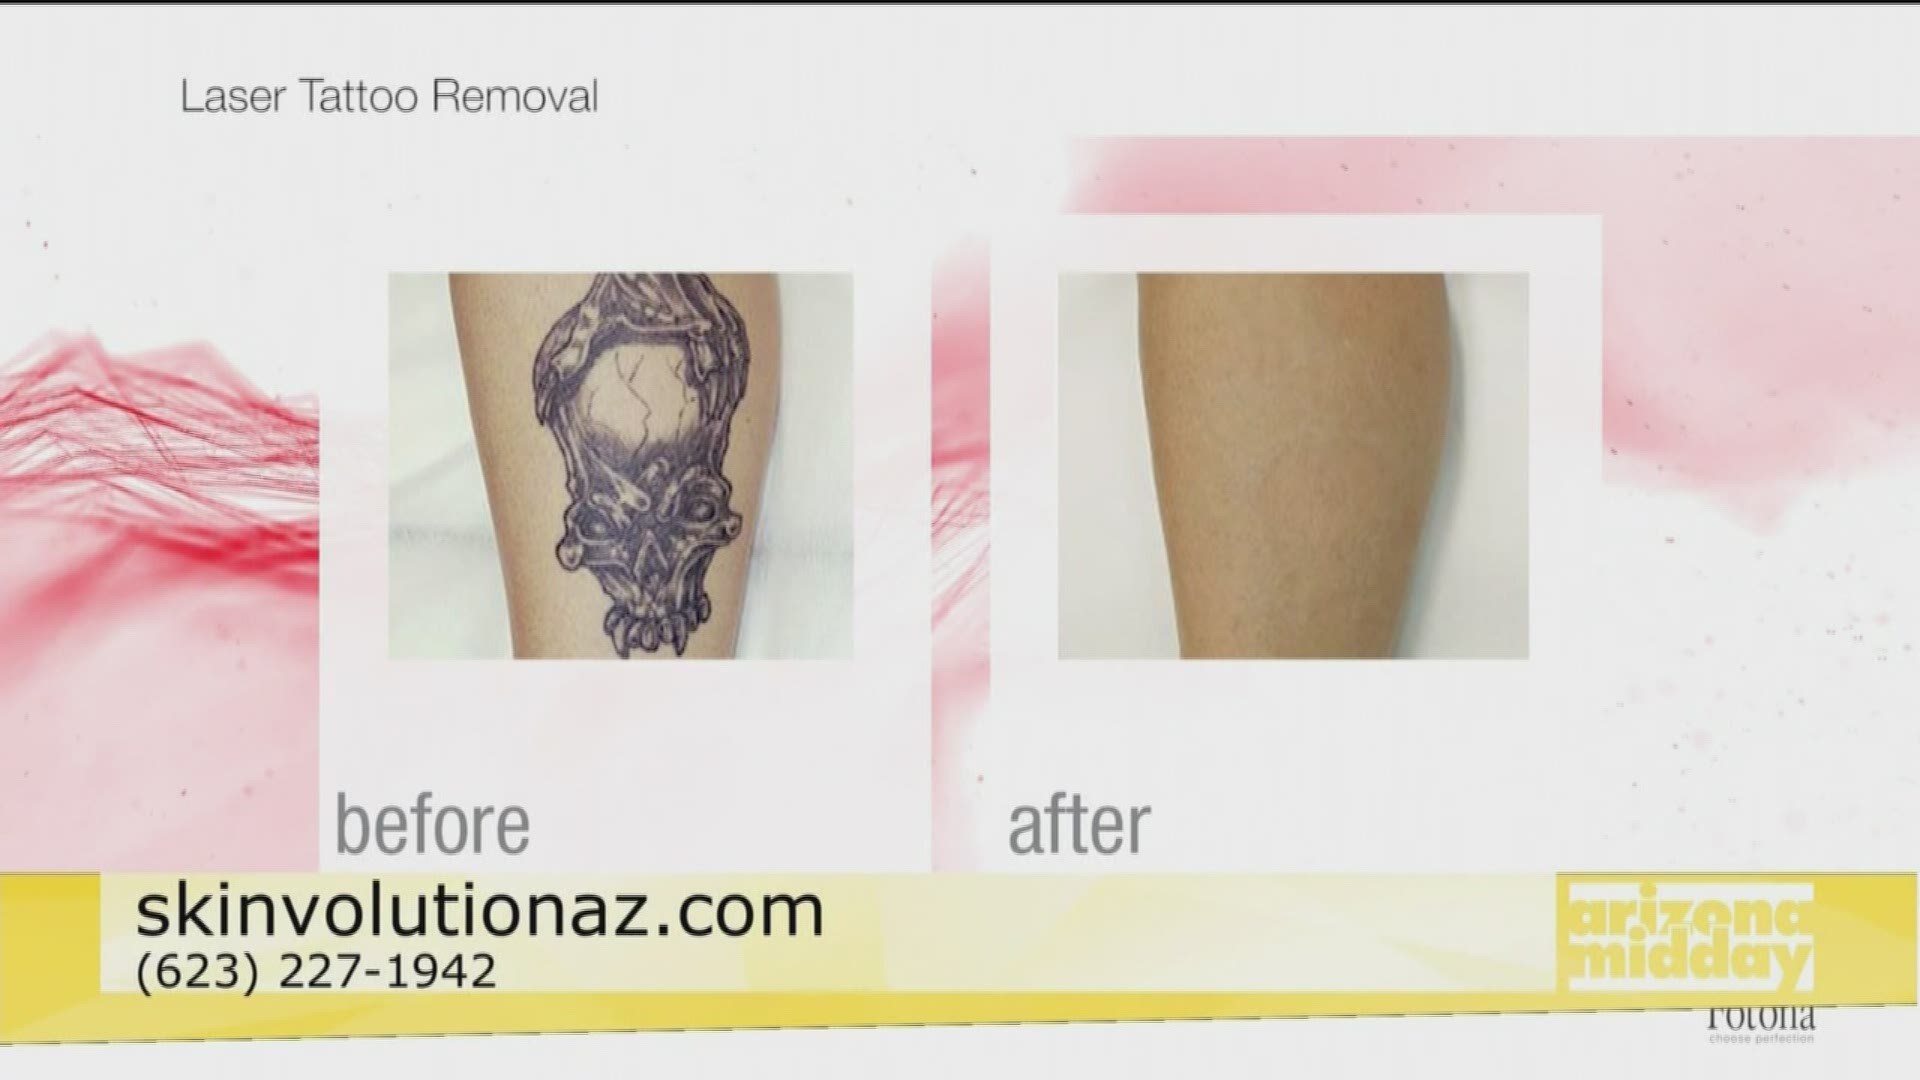 Removery a laser tattoo removal clinic to open flagship location  New  York Business Journal